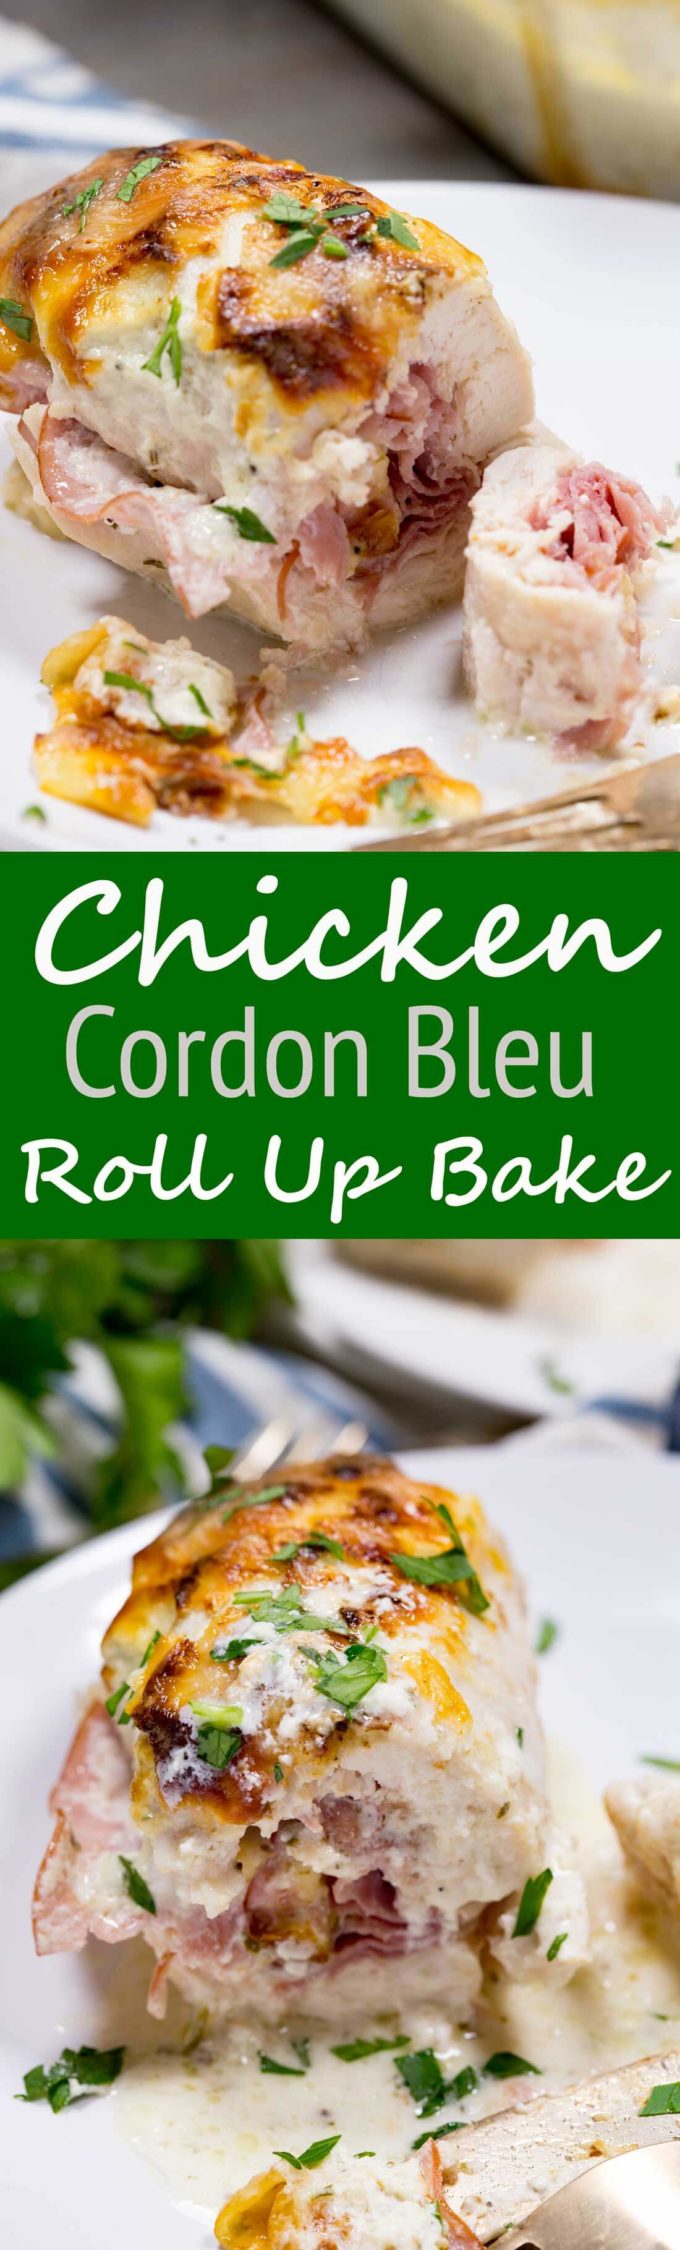 Chicken Cordon Bleu Roll Up Bake is a delicious dinner option